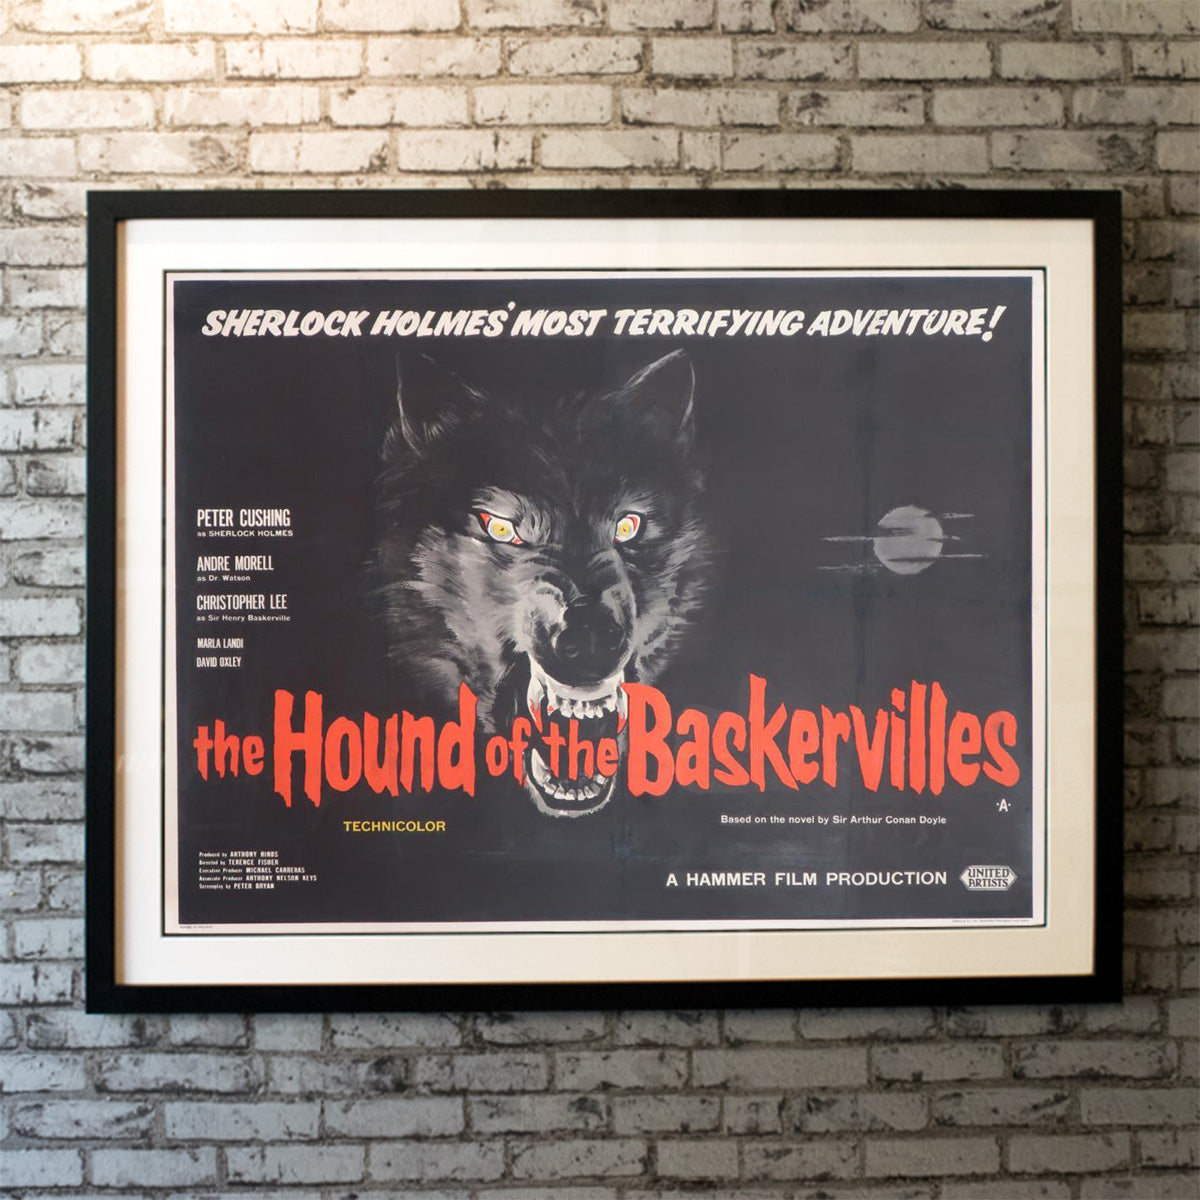 Original Movie Poster of Hound Of The Baskervilles, The (1959)